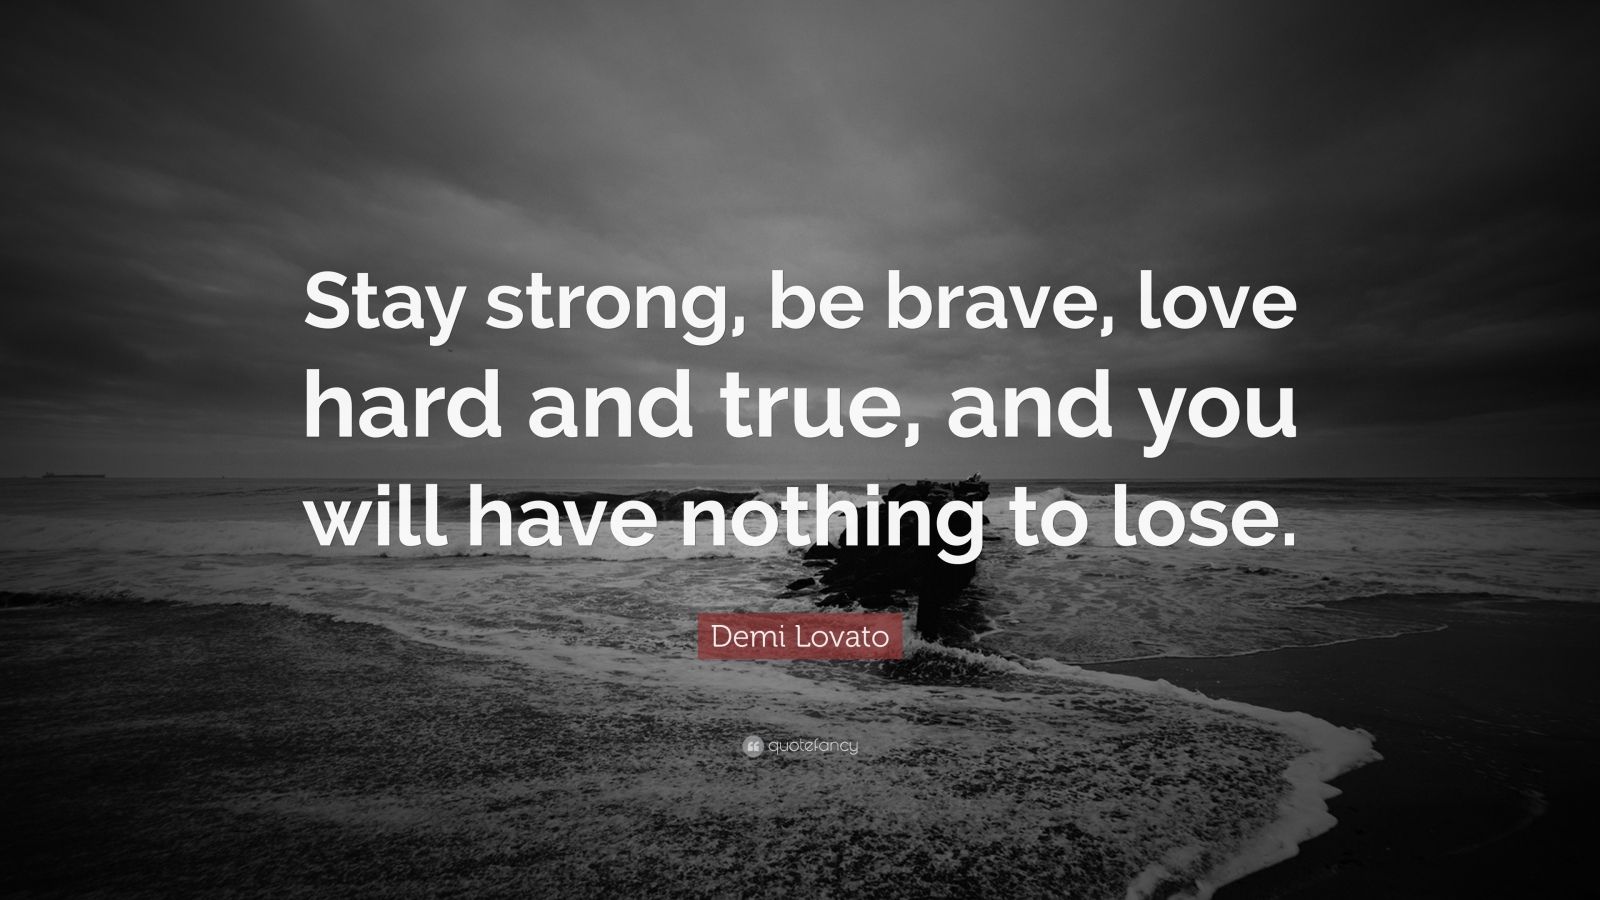 63426 Demi Lovato Quote Stay strong be brave love hard and true and you